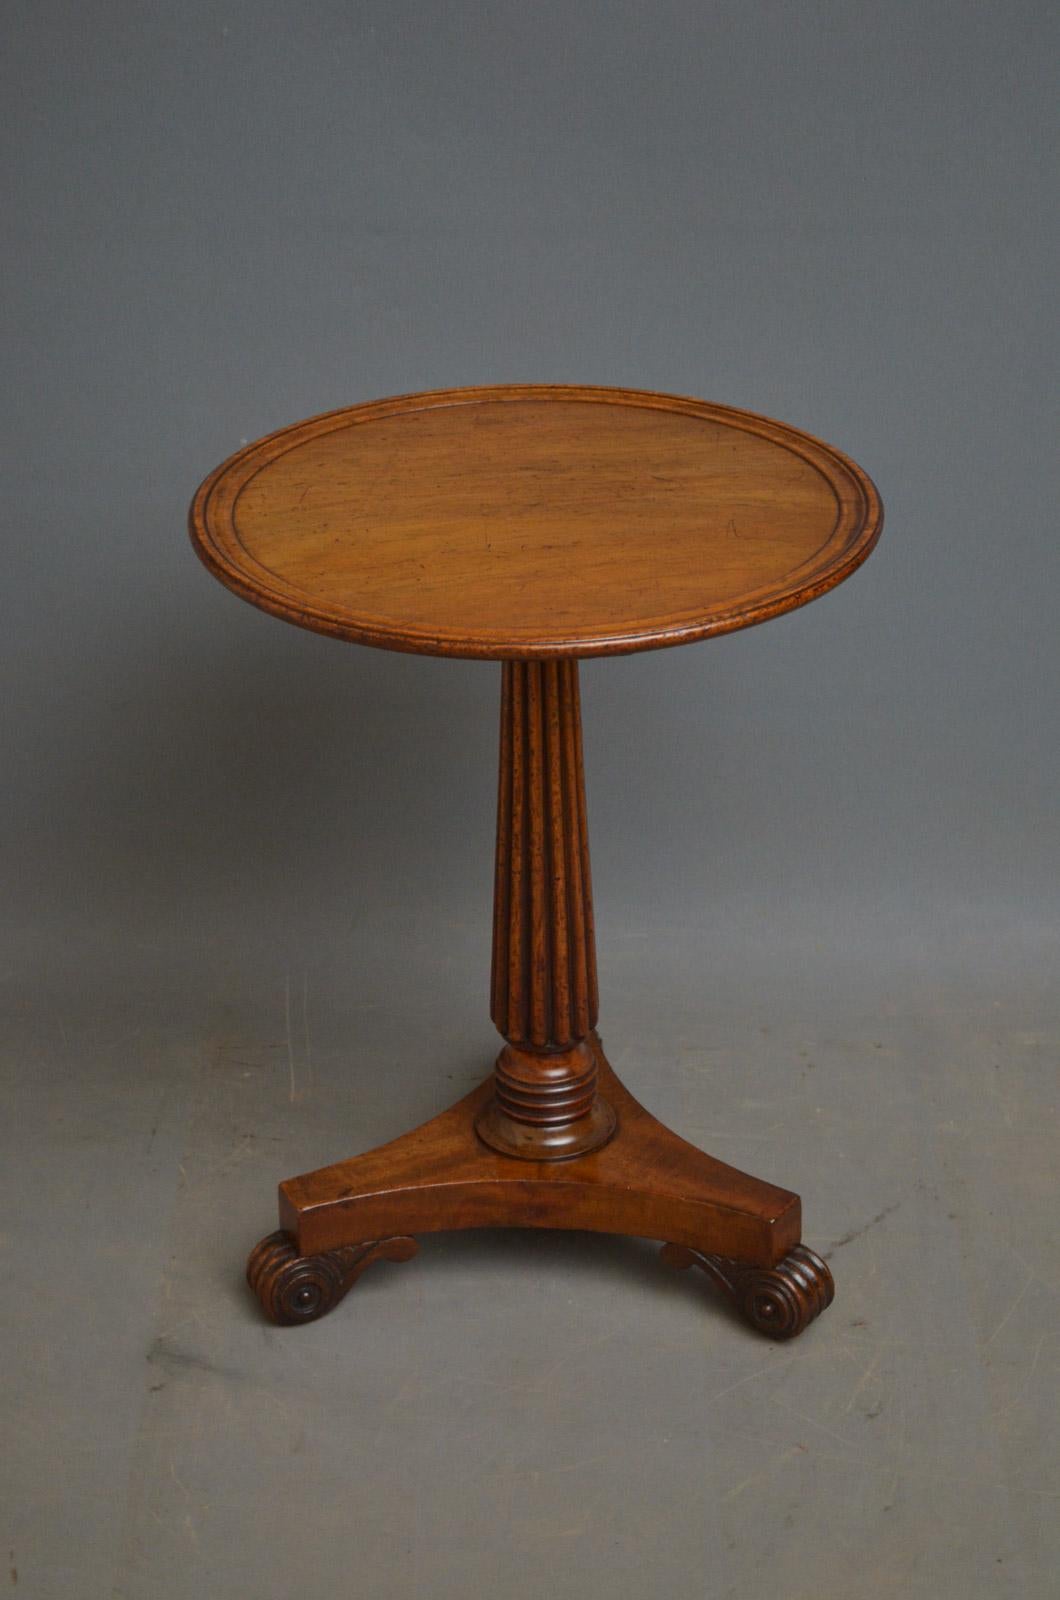 Sn4465 Elegant and very practical Regency mahogany table reduced to the size of coffee table, having dished top and fluted column terminating in trefoil base and reeded knurl feet. This antique table is a marriage of two associated period pieces,